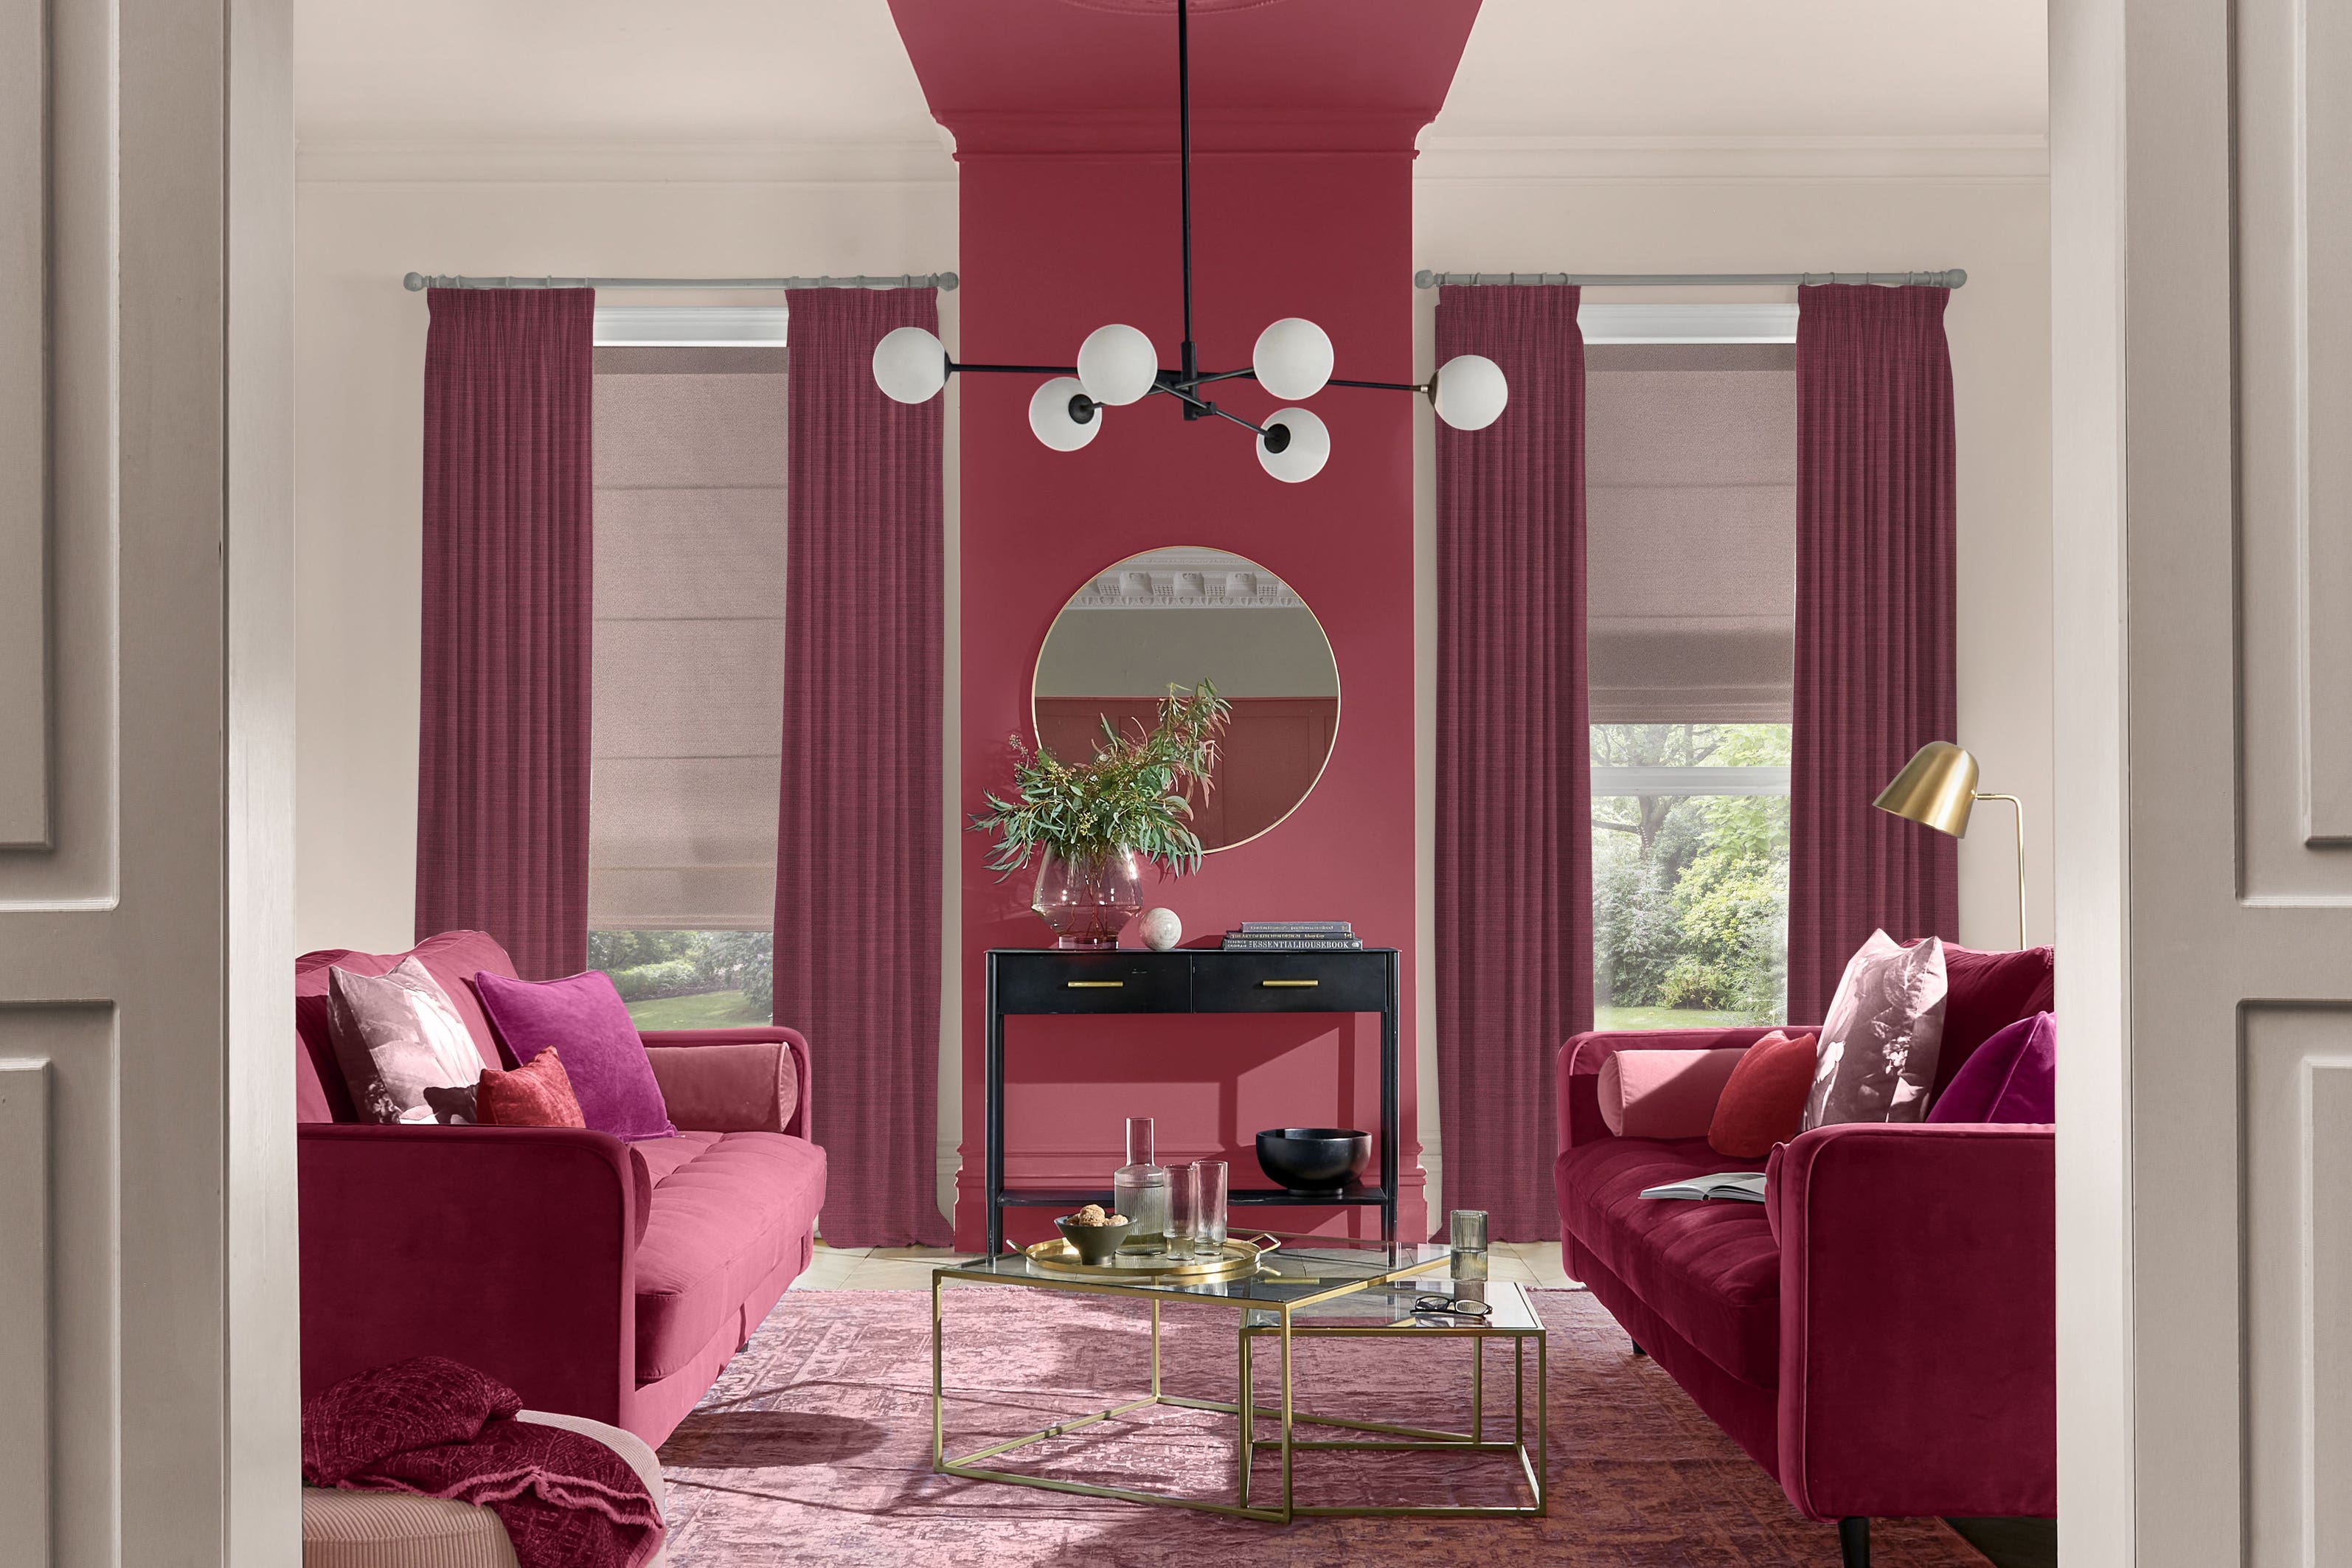 Color of the year 2023: Viva Magenta, unconventional red